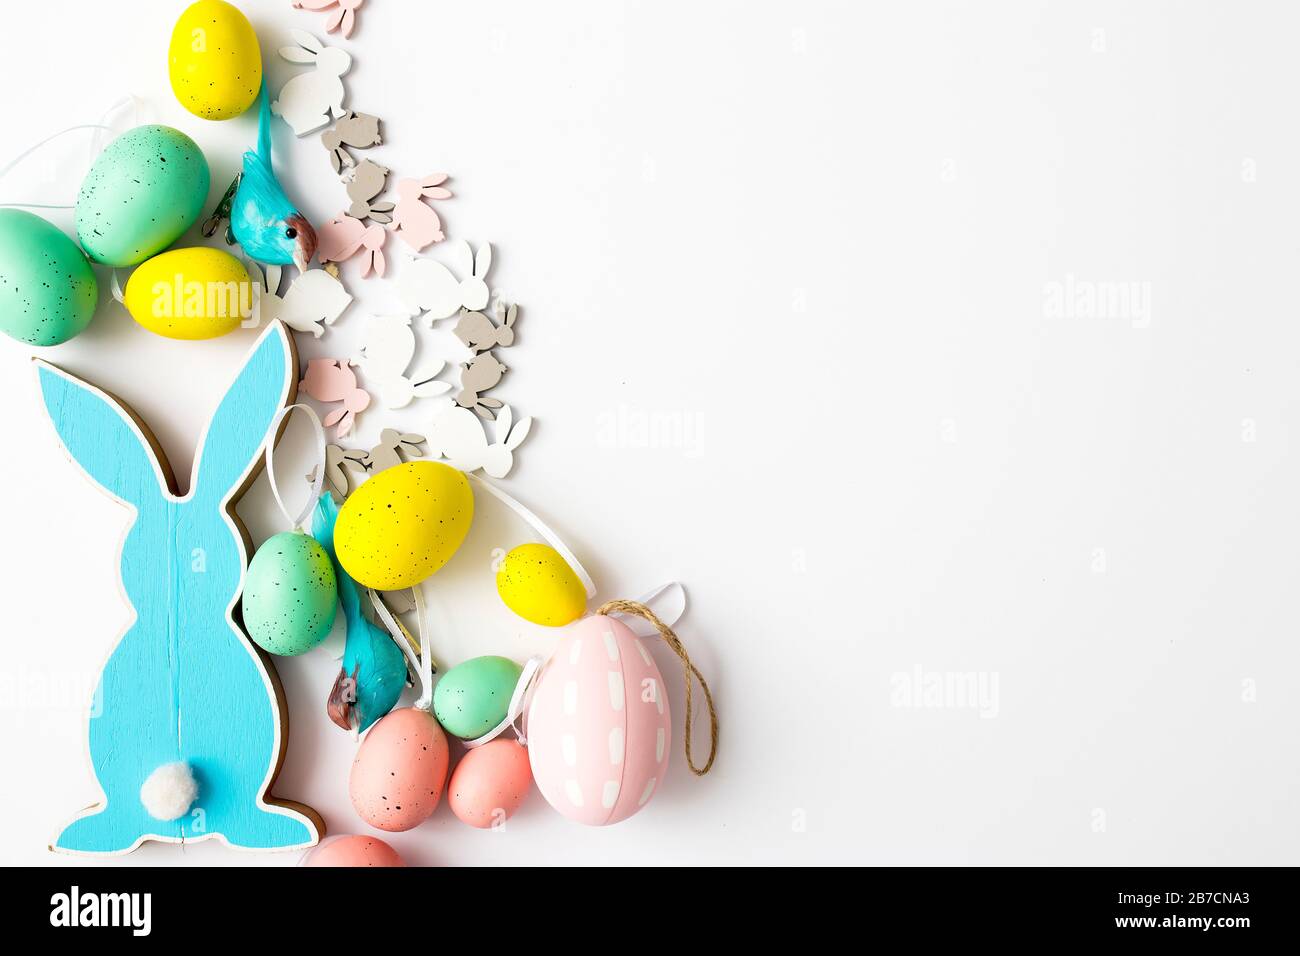 Blue wooden flat easter bunny with plastic eggs lies on a white background. Copy space Stock Photo